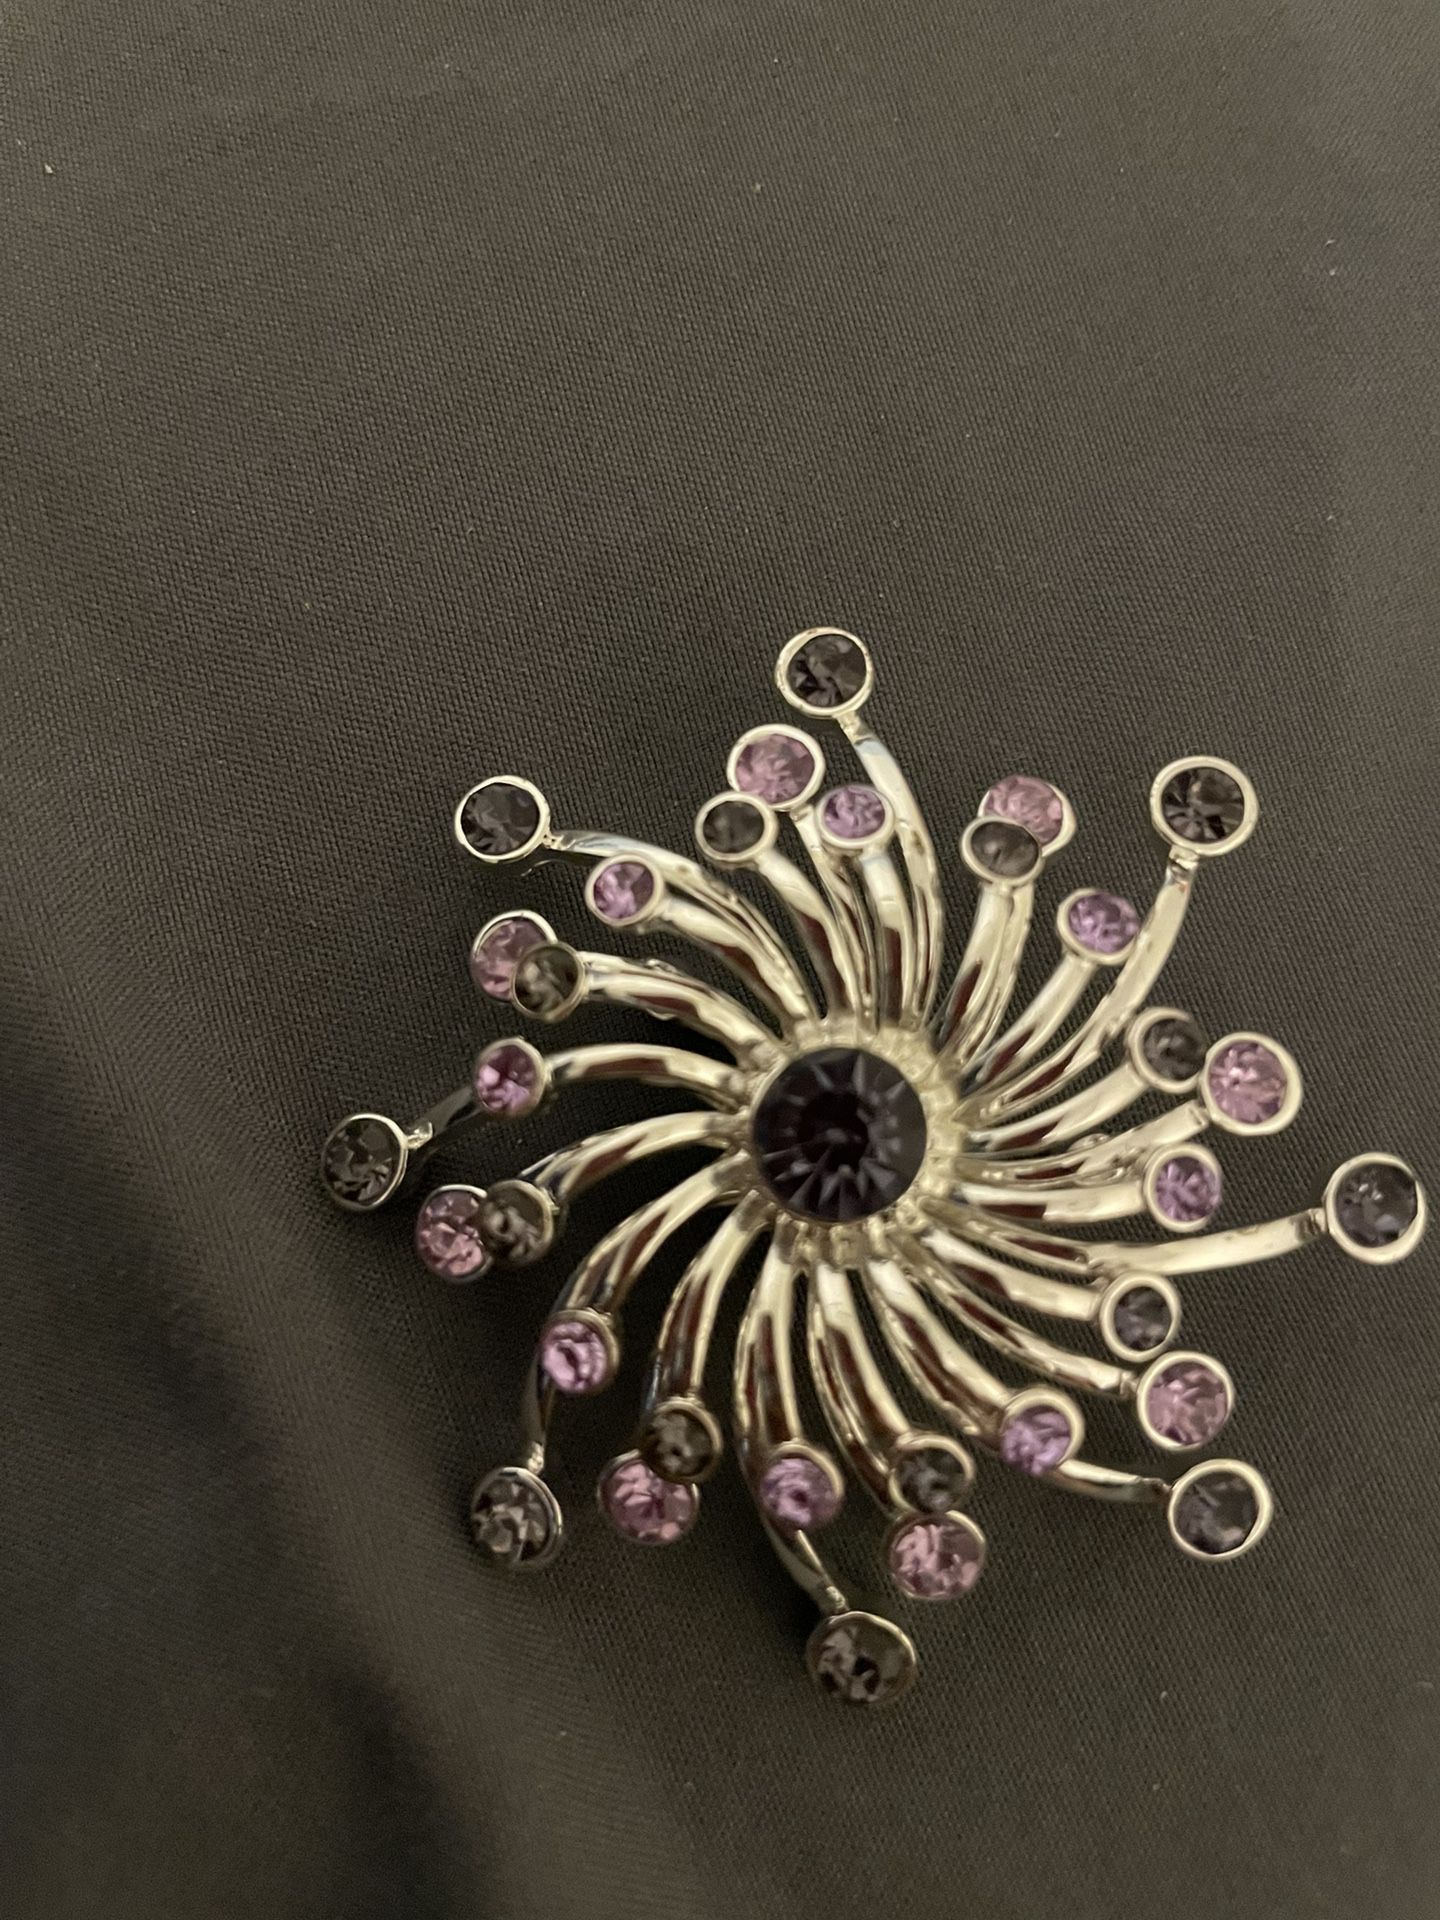 COSTUME JEWELRY. BROOCH. POST IS UP, IT’S AVAILABLE 